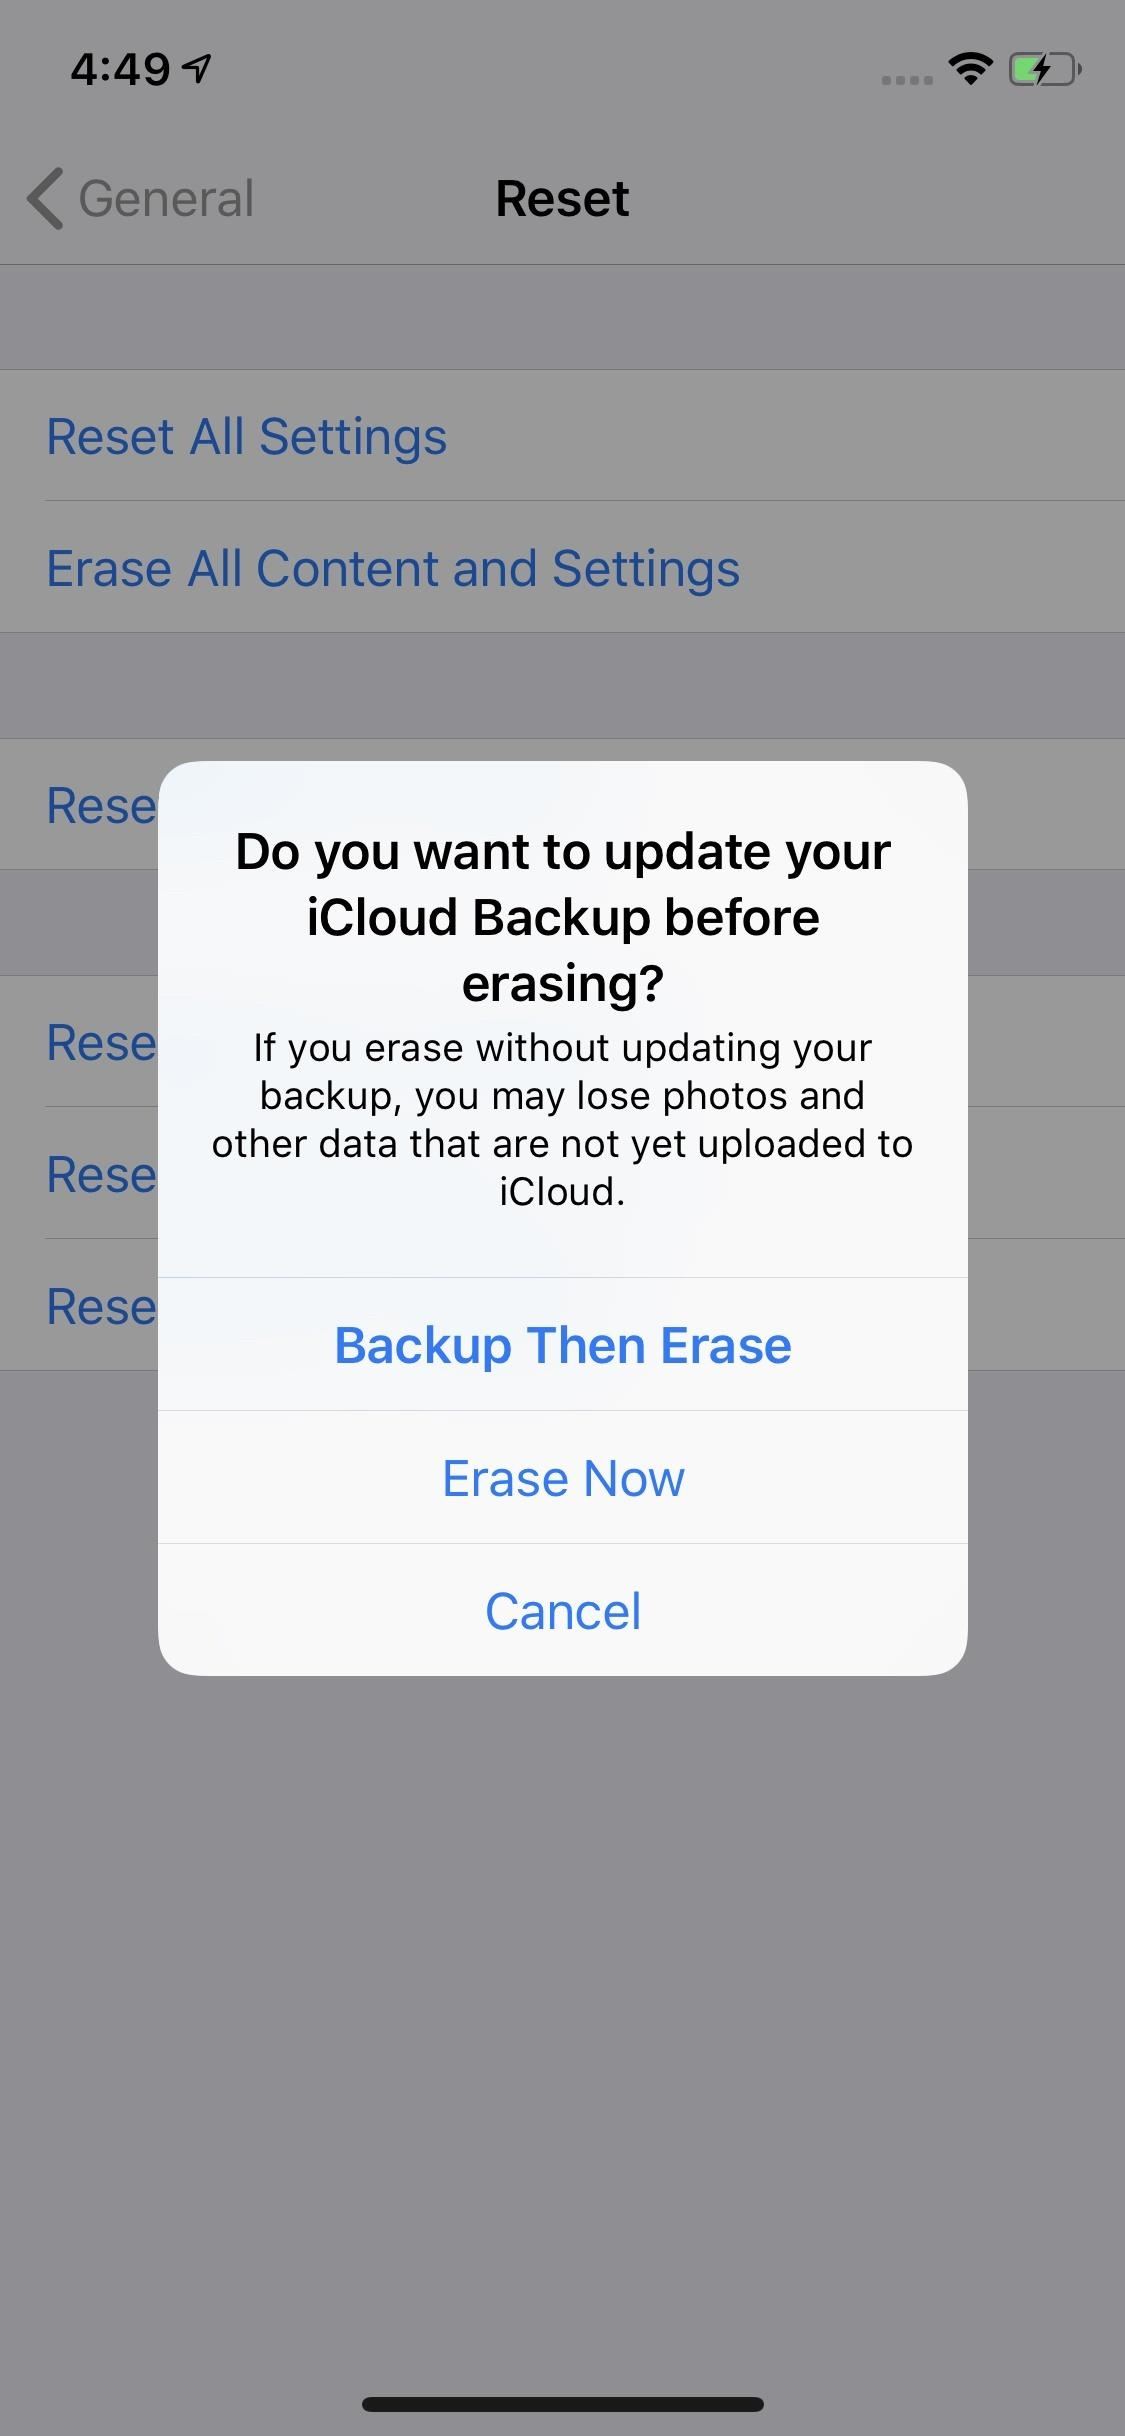 iOS Security: How to Untrust Computers Your iPhone Previously Connected To So They Can't Access Your Private Data